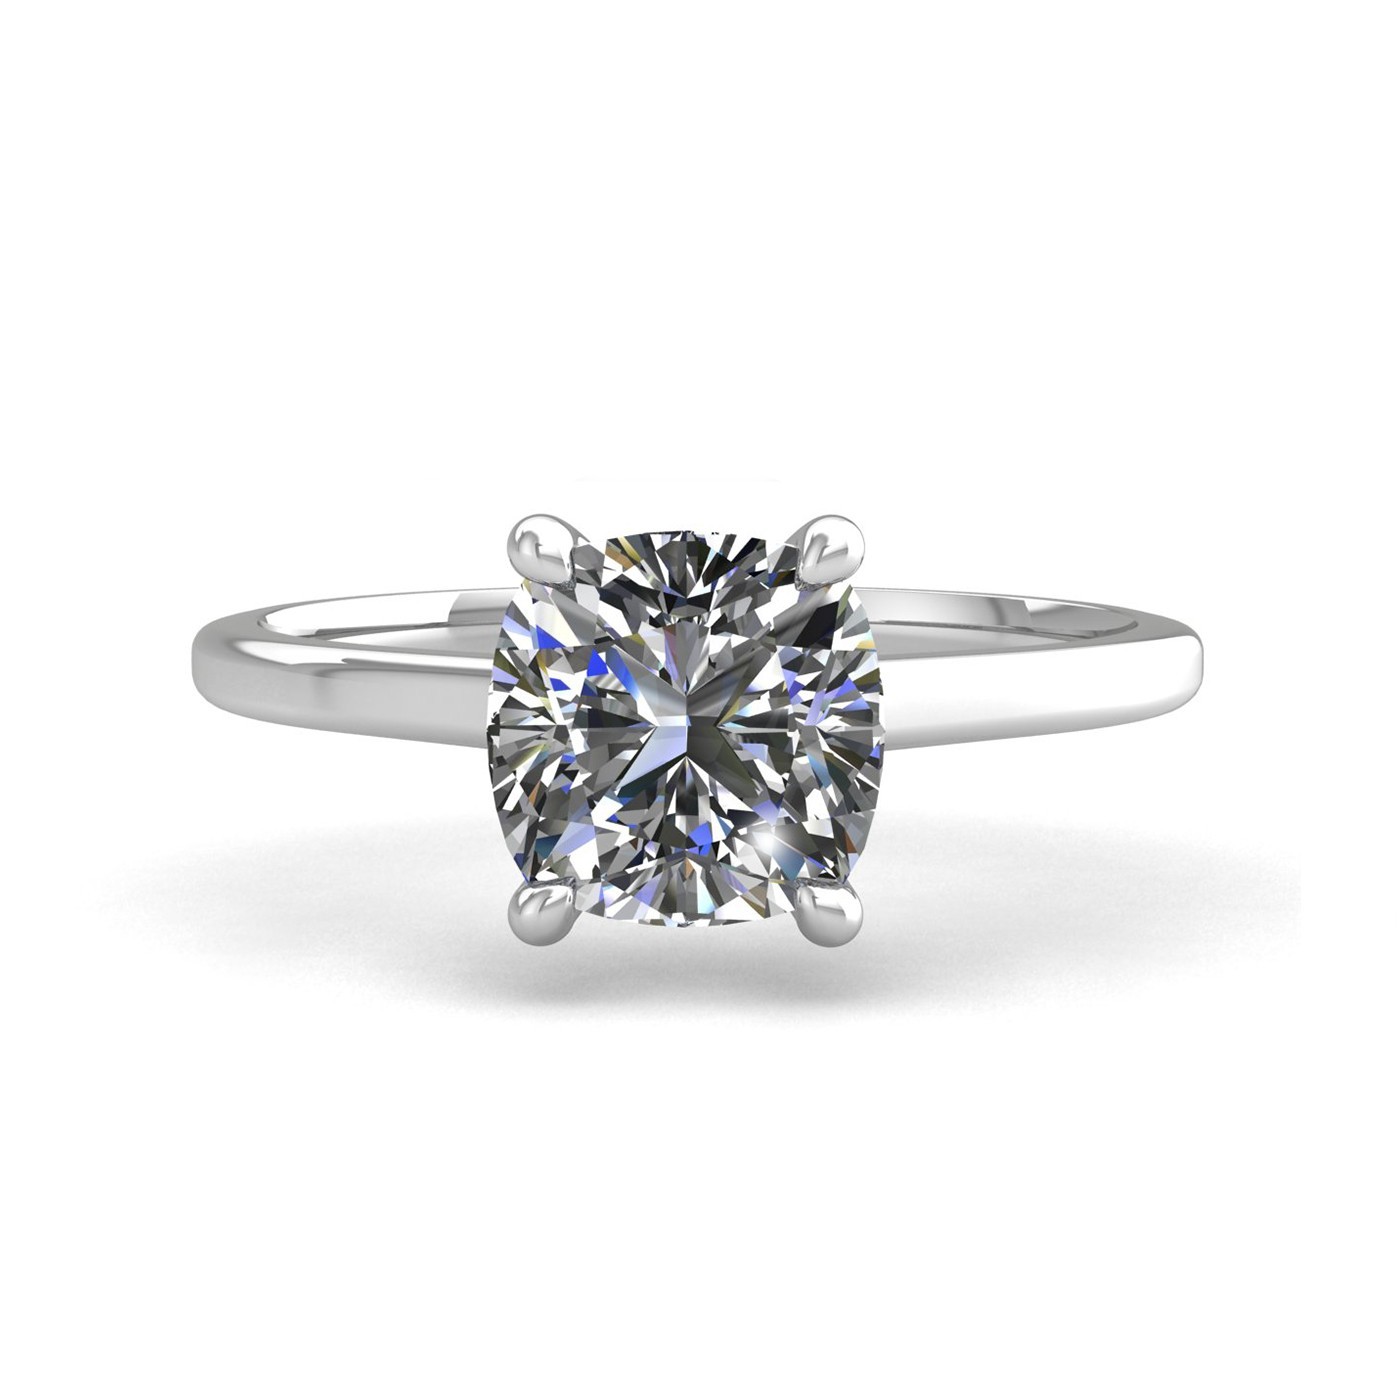 18k white gold 0,80 ct 4 prongs solitaire cushion cut diamond engagement ring with whisper thin band Photos & images